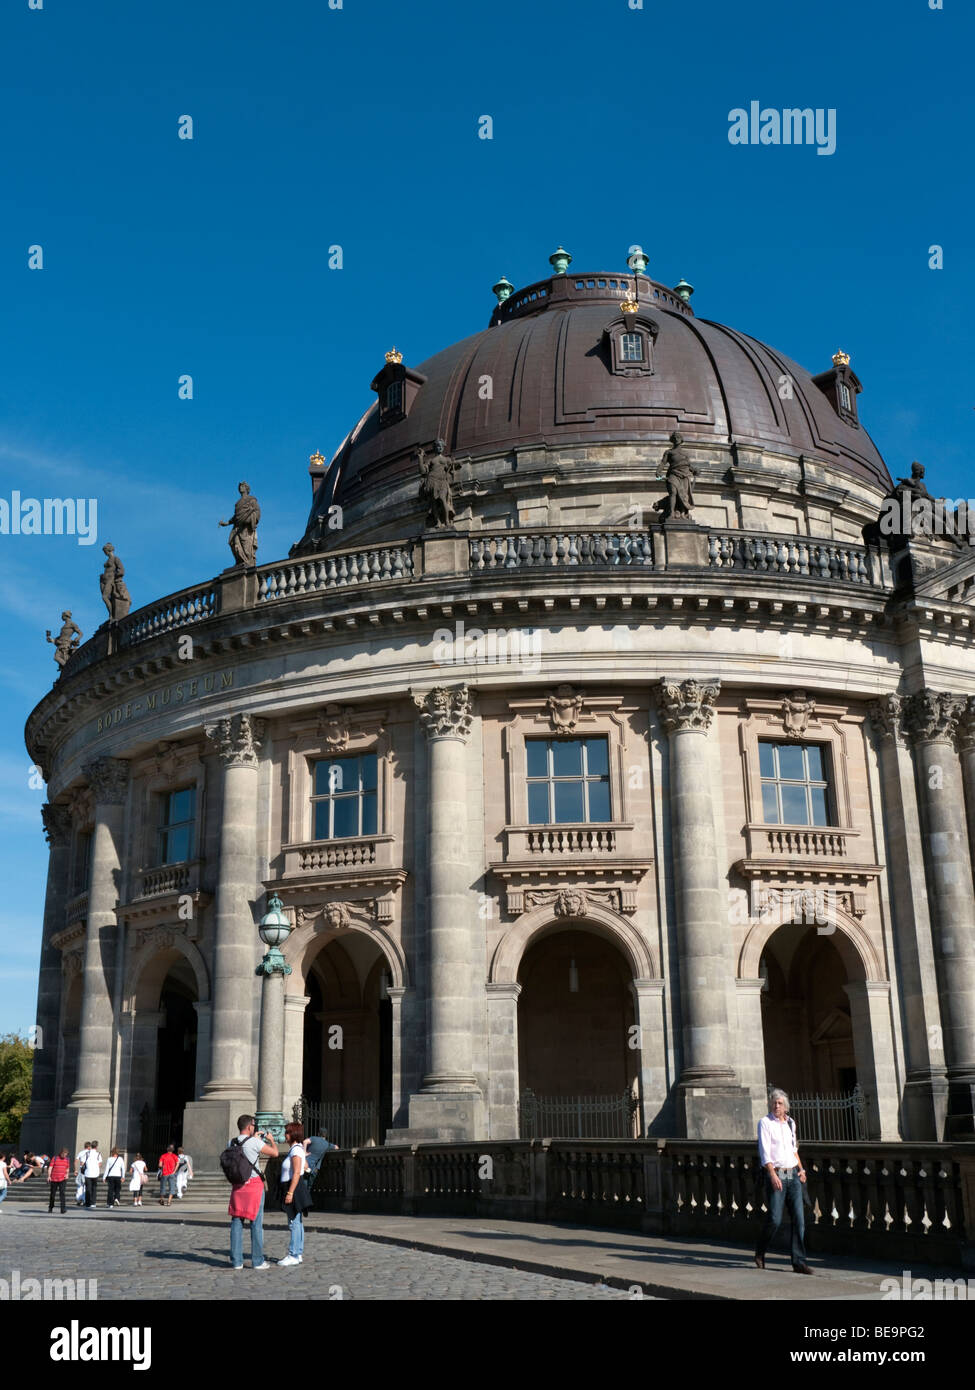 Exterior of famous Bode Museum on Museumsinsel in Berlin Germany Stock Photo